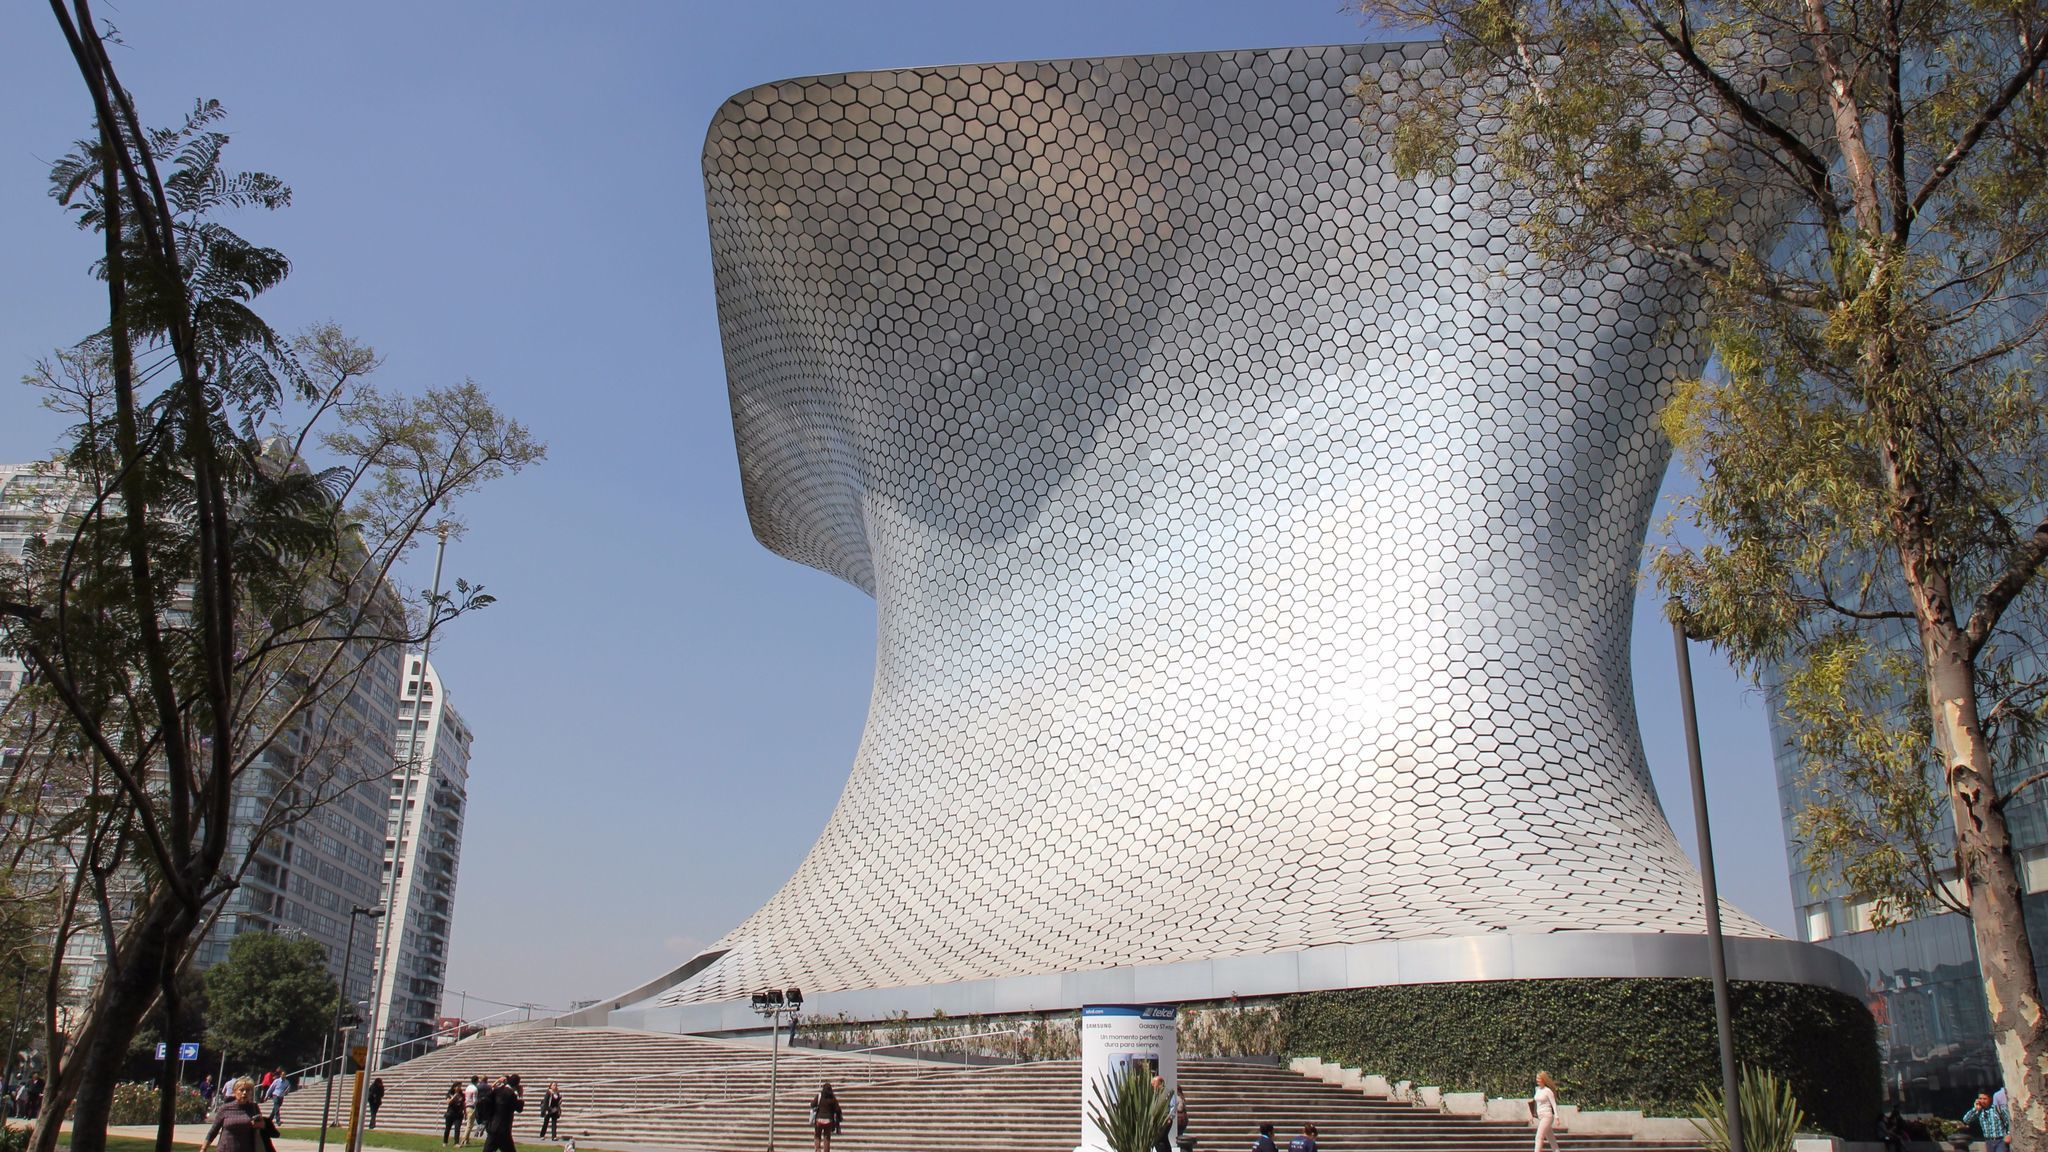 The Museo Soumaya in Mexico City, which shows the collection of Carlos Slim.